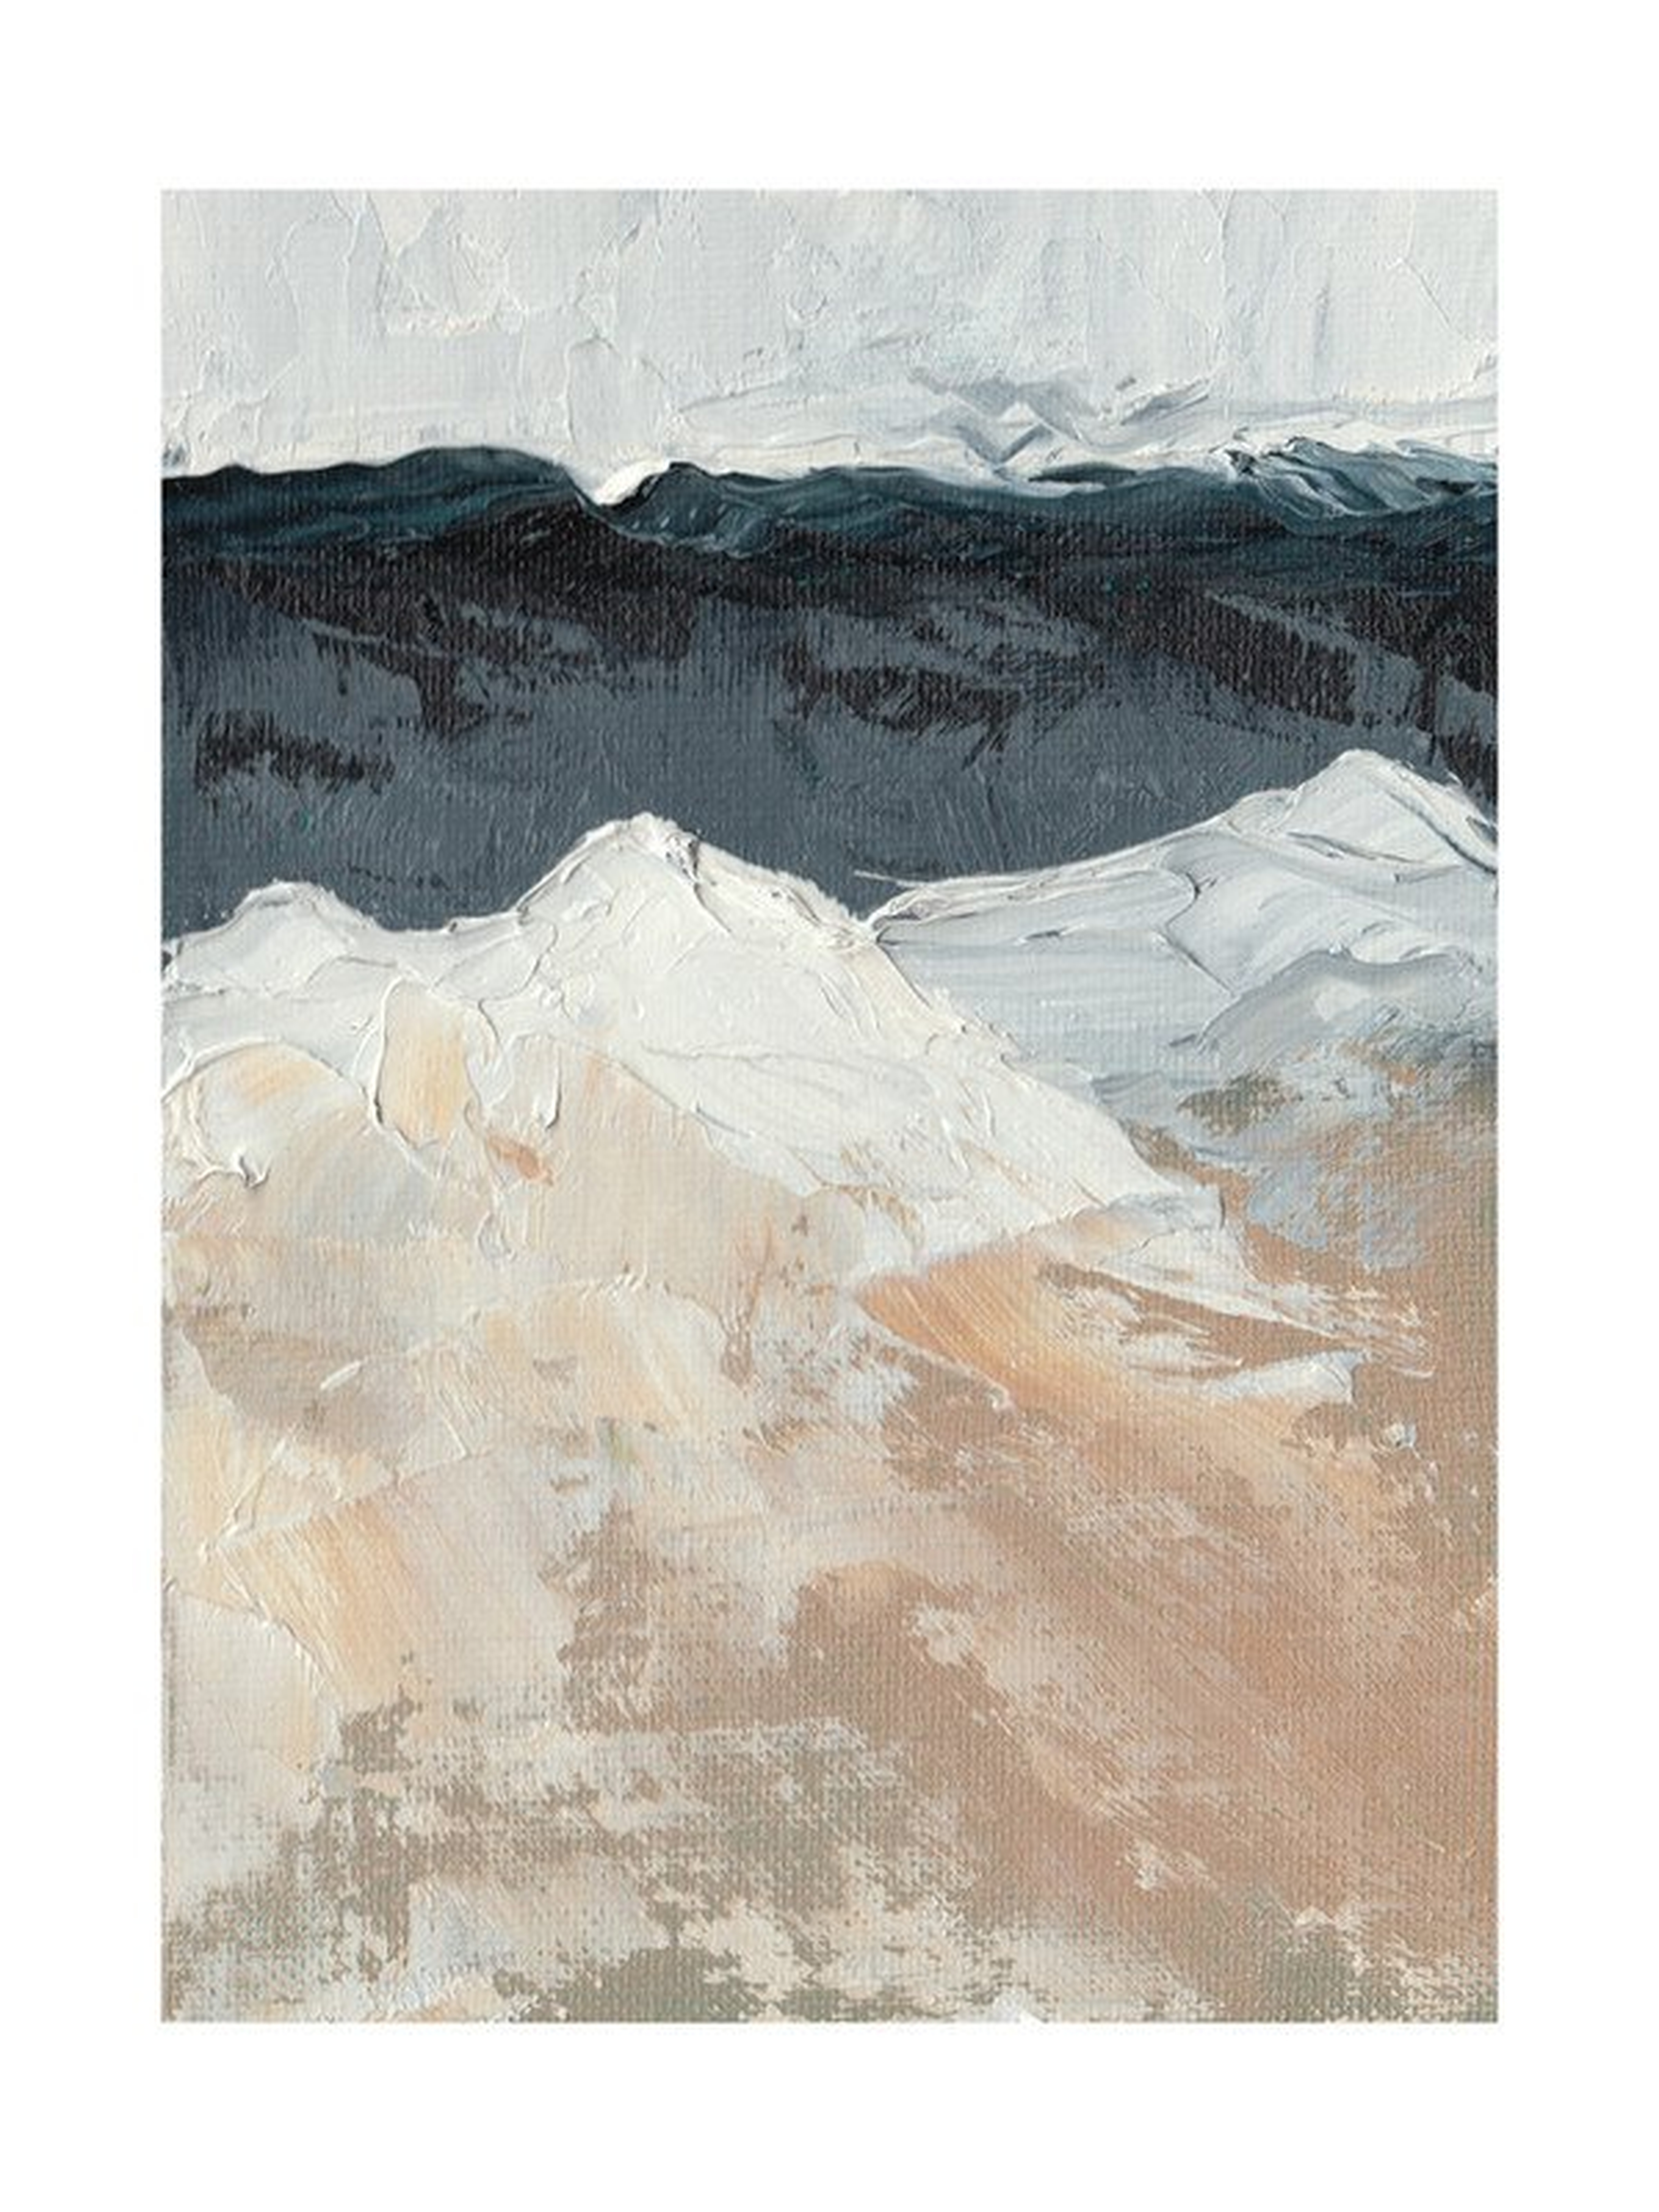 Mountain Movements - 18" x 24" - Minted